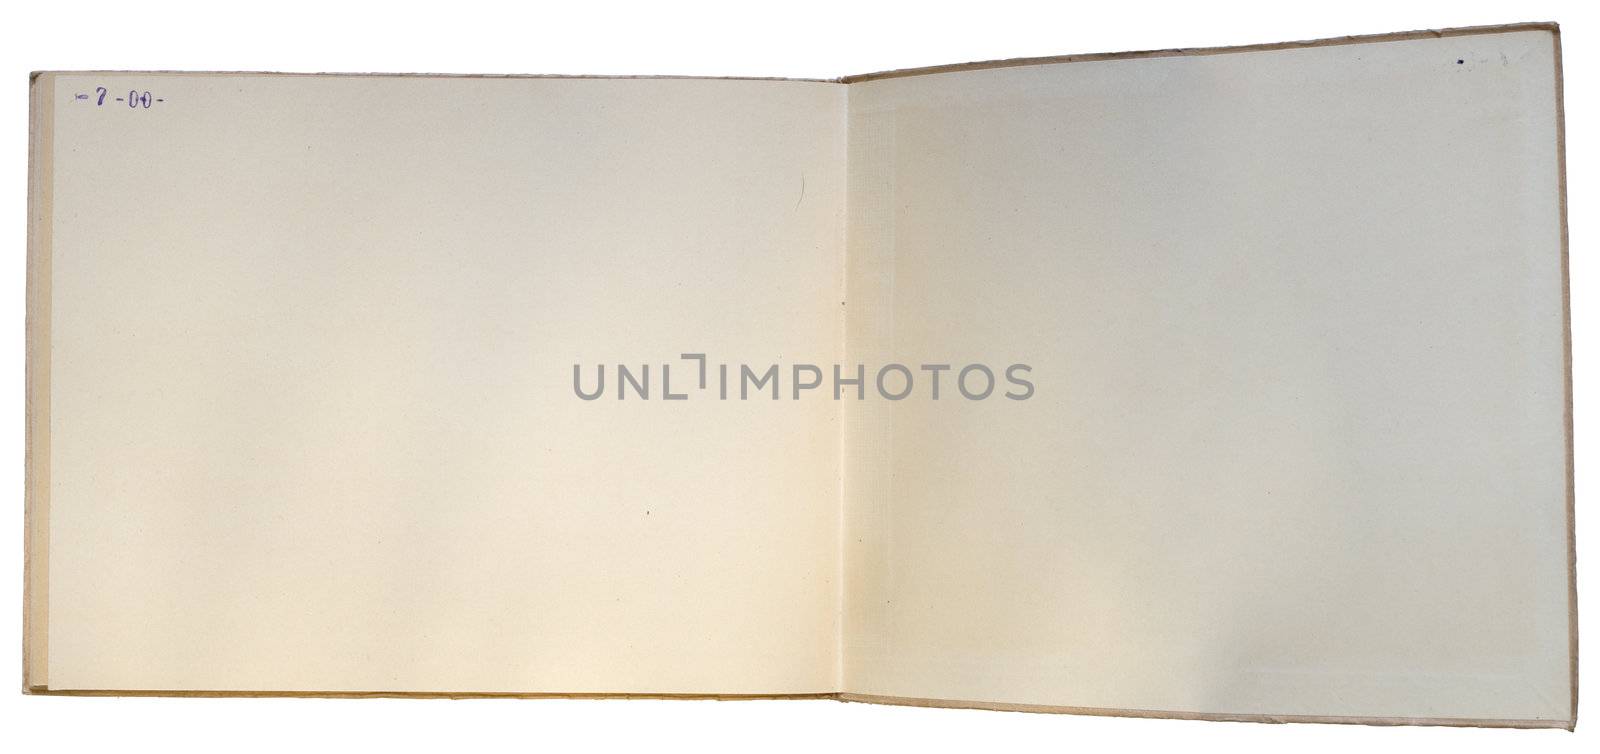 Old open book isolated on white background. Clipping path included to easy replace background.